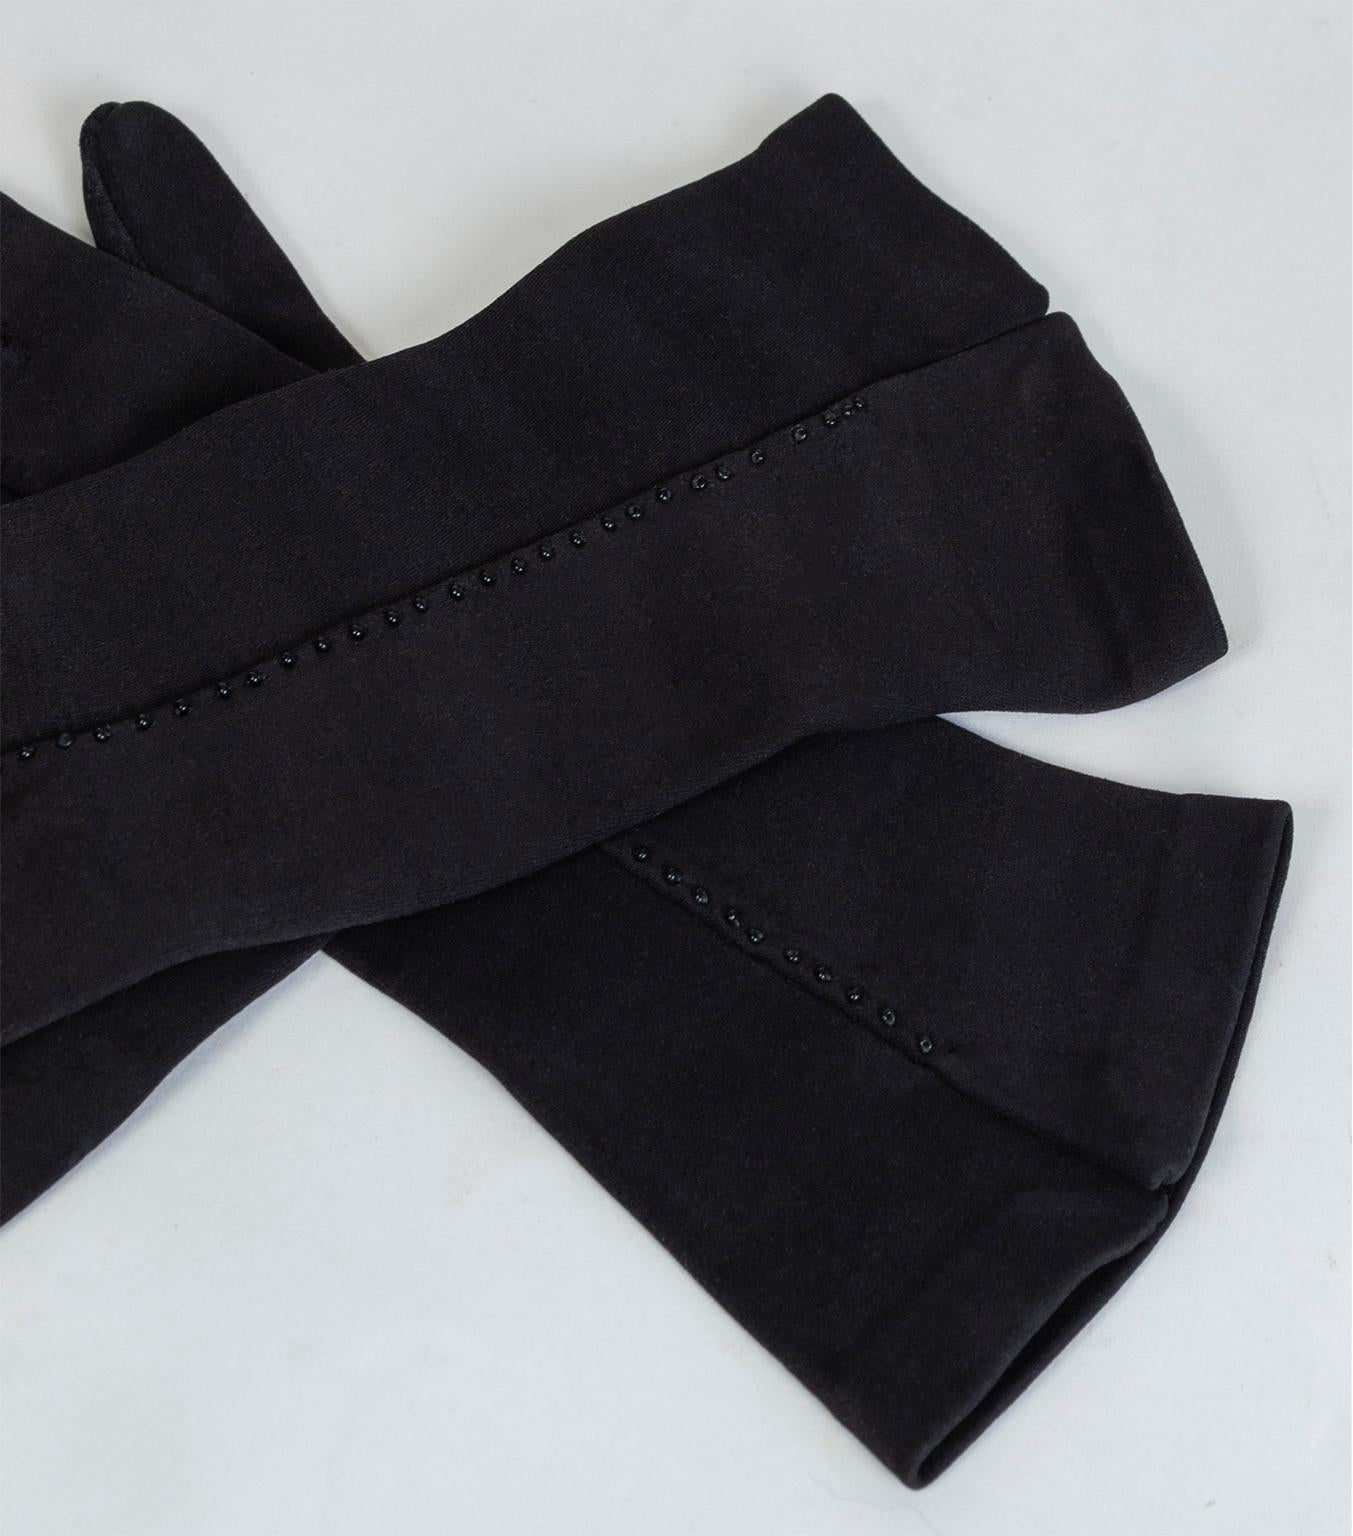 Though they serve a practical purpose, gloves can also be an opportunity to express your personal style. To wit, these velvety evening gloves feature a demure line of seed beads from the middle finger to the cuff for an elegant splash of bling that